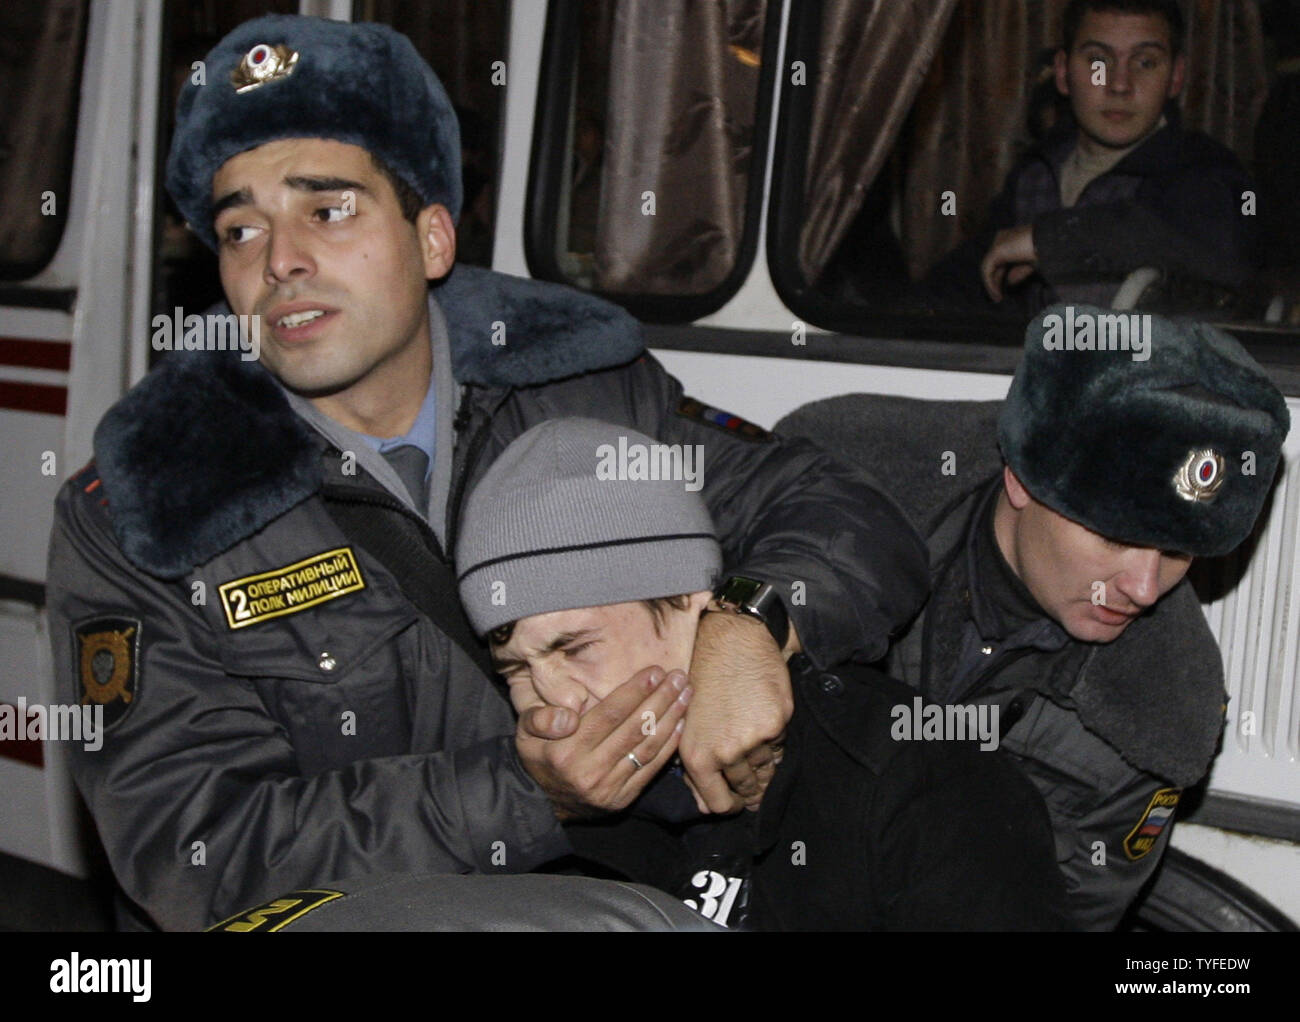 Russian riot police detain an opposition activist during an unauthorised rally in Moscow demanding freedom of assembly on October 31, 2009. UPI/Anatoli Zhdanov Stock Photo